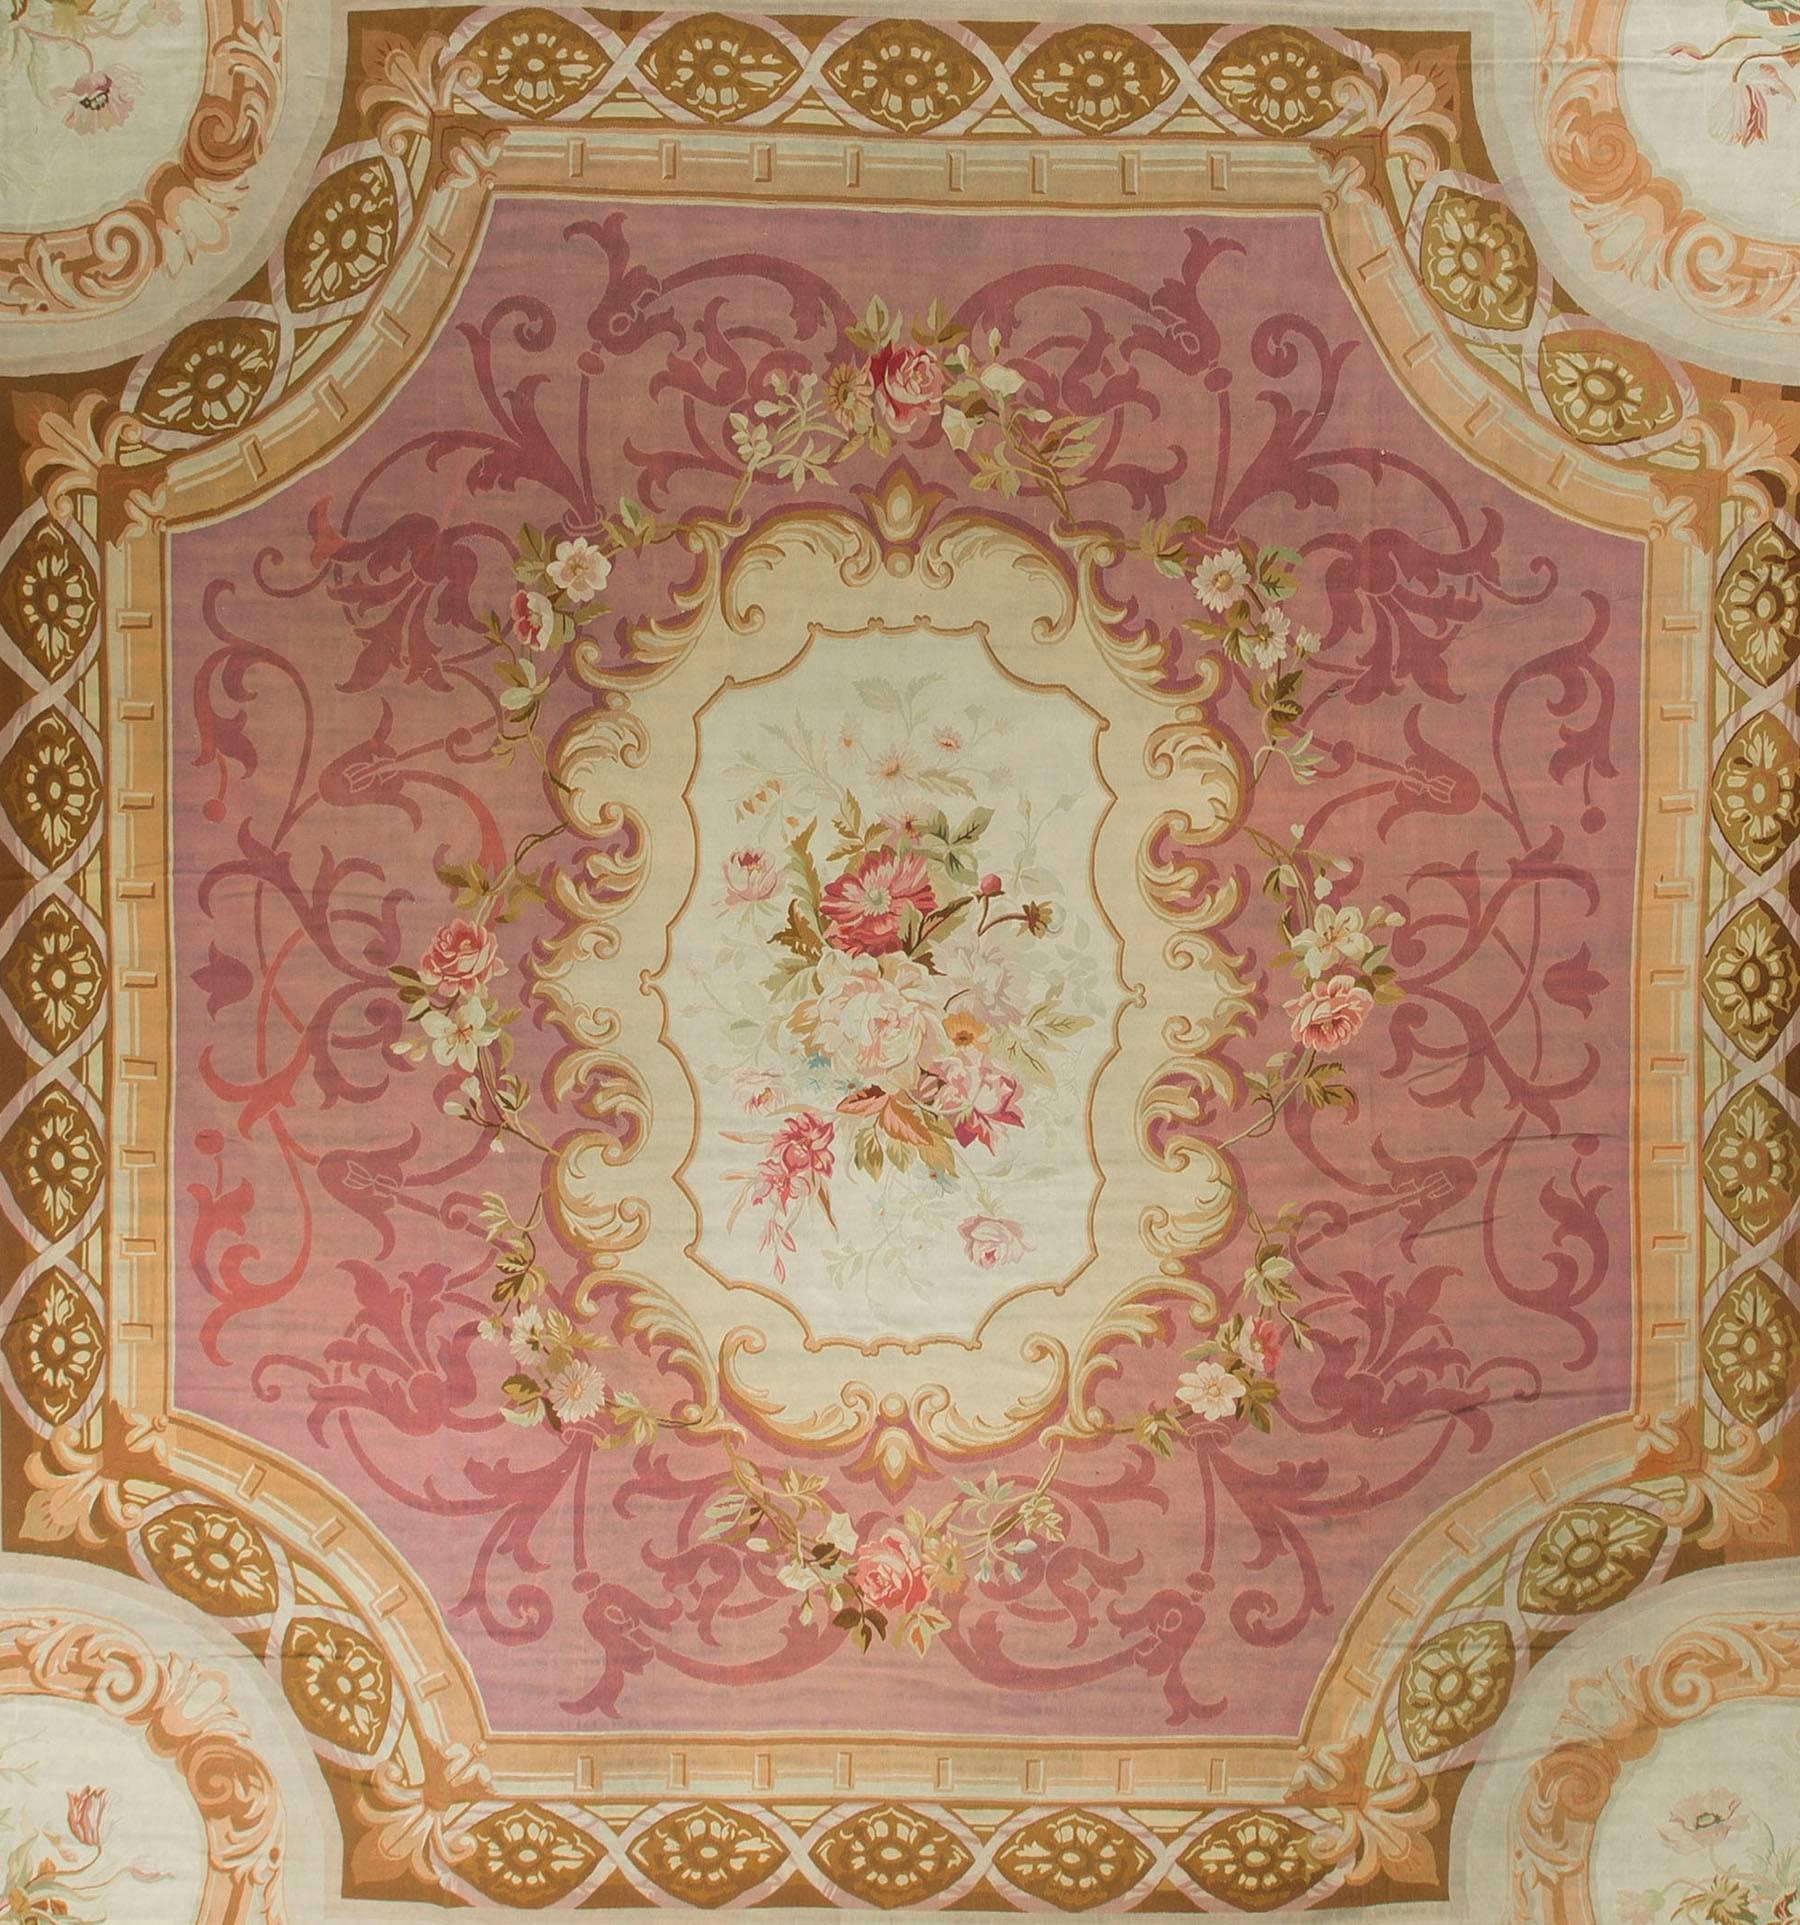 A difficult to find square Aubusson, with a wonderful composition. The central ivory medallion enclosed in a swirl of soft rose colored vines all surrounded by a glorious border in soft greens with four splendid spandrels with a floral theme.